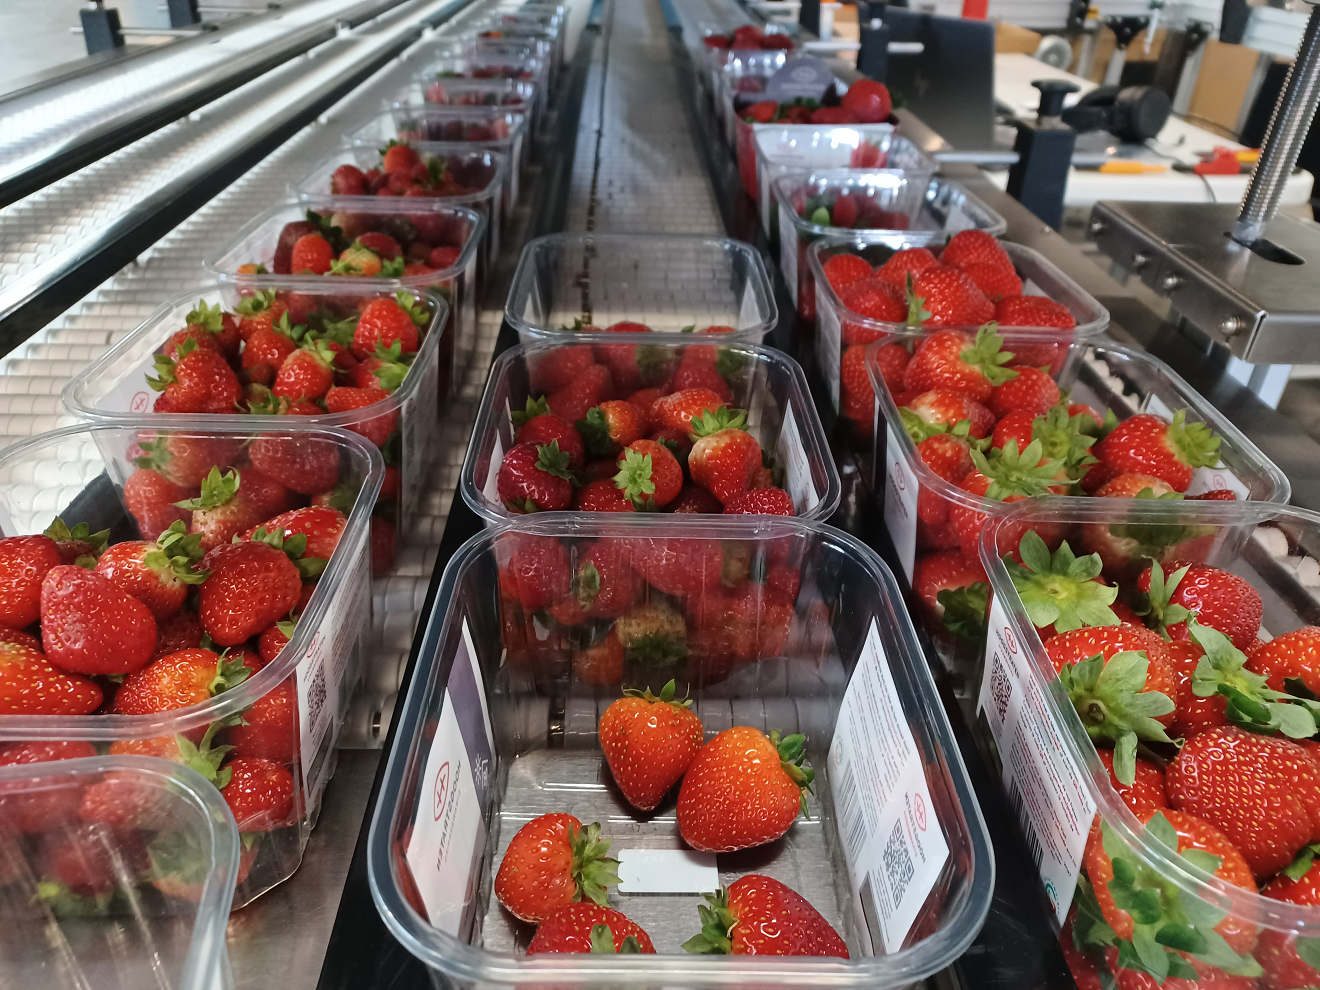 CLASSIFICATION AND REGISTRATION OF STRAWBERRY PUNNETS